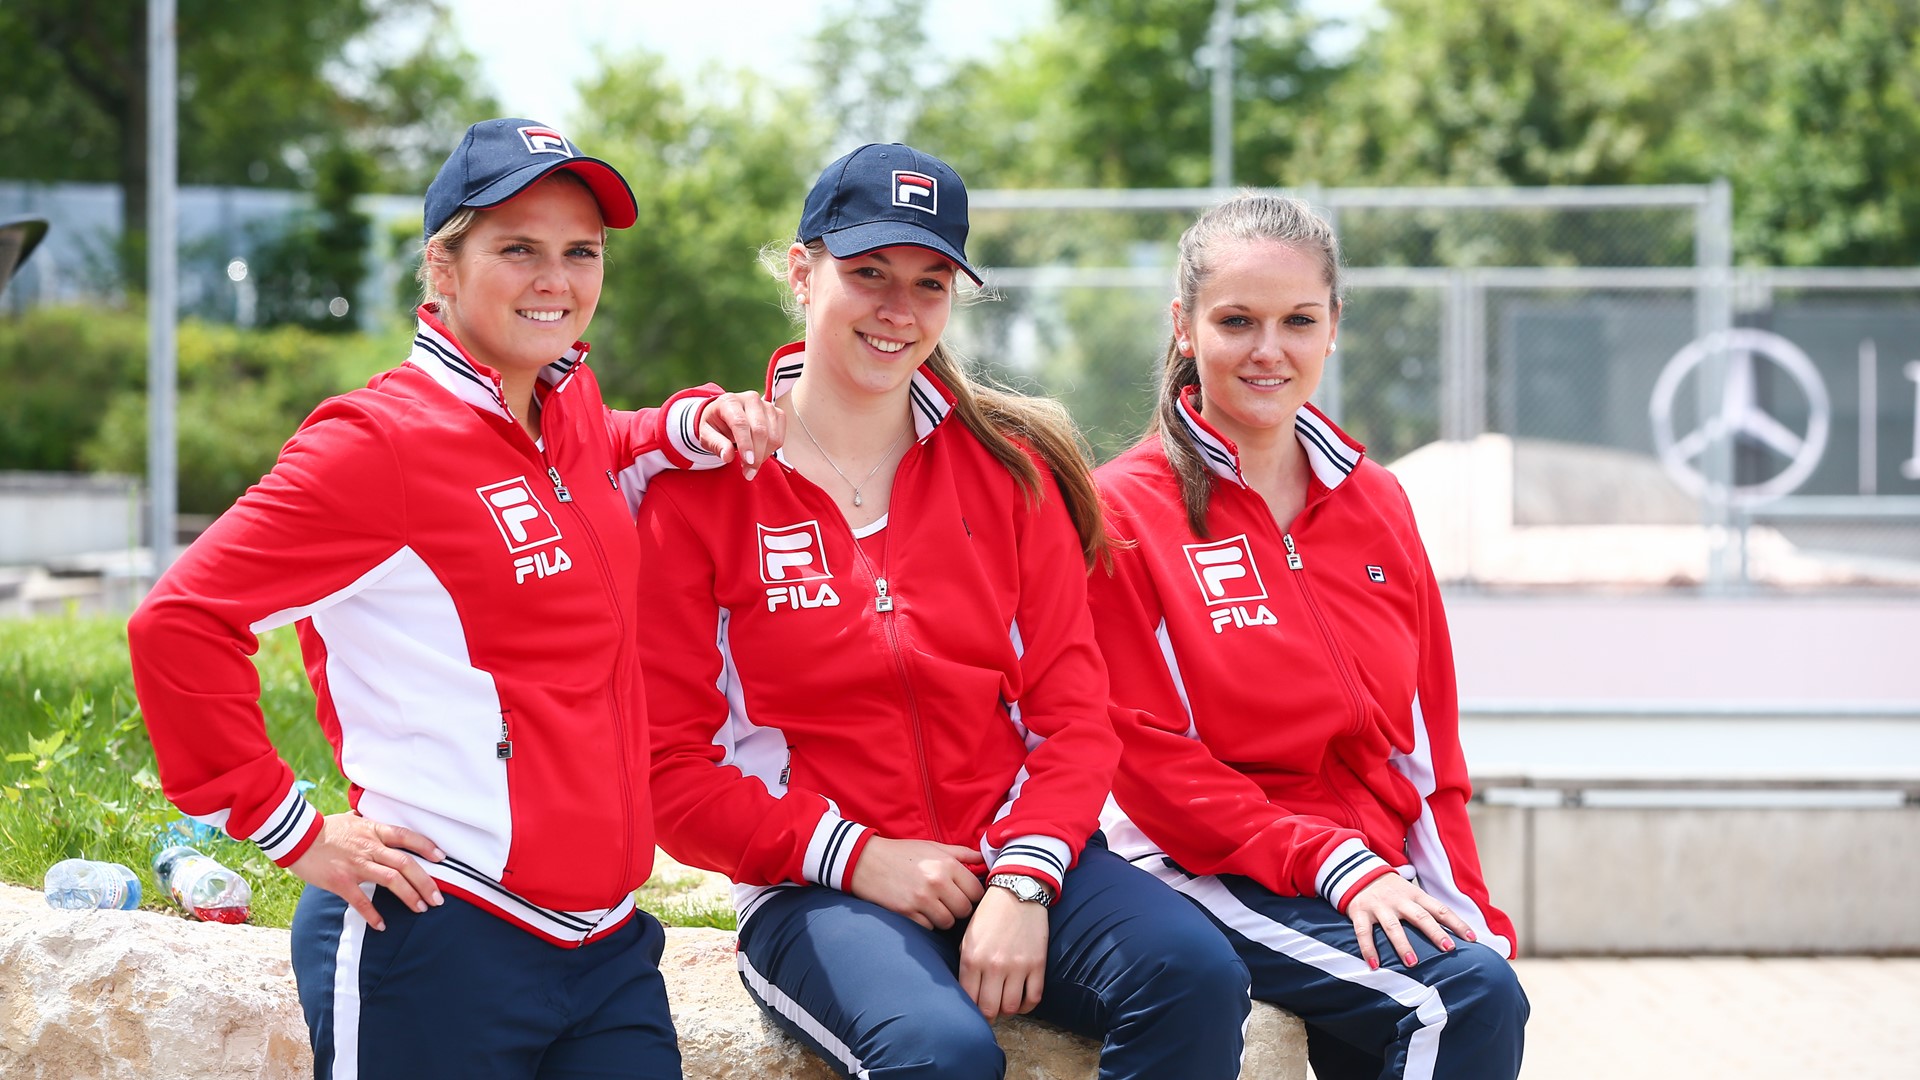 FILA Personnel at the Mercedes Cup in Stuttgart